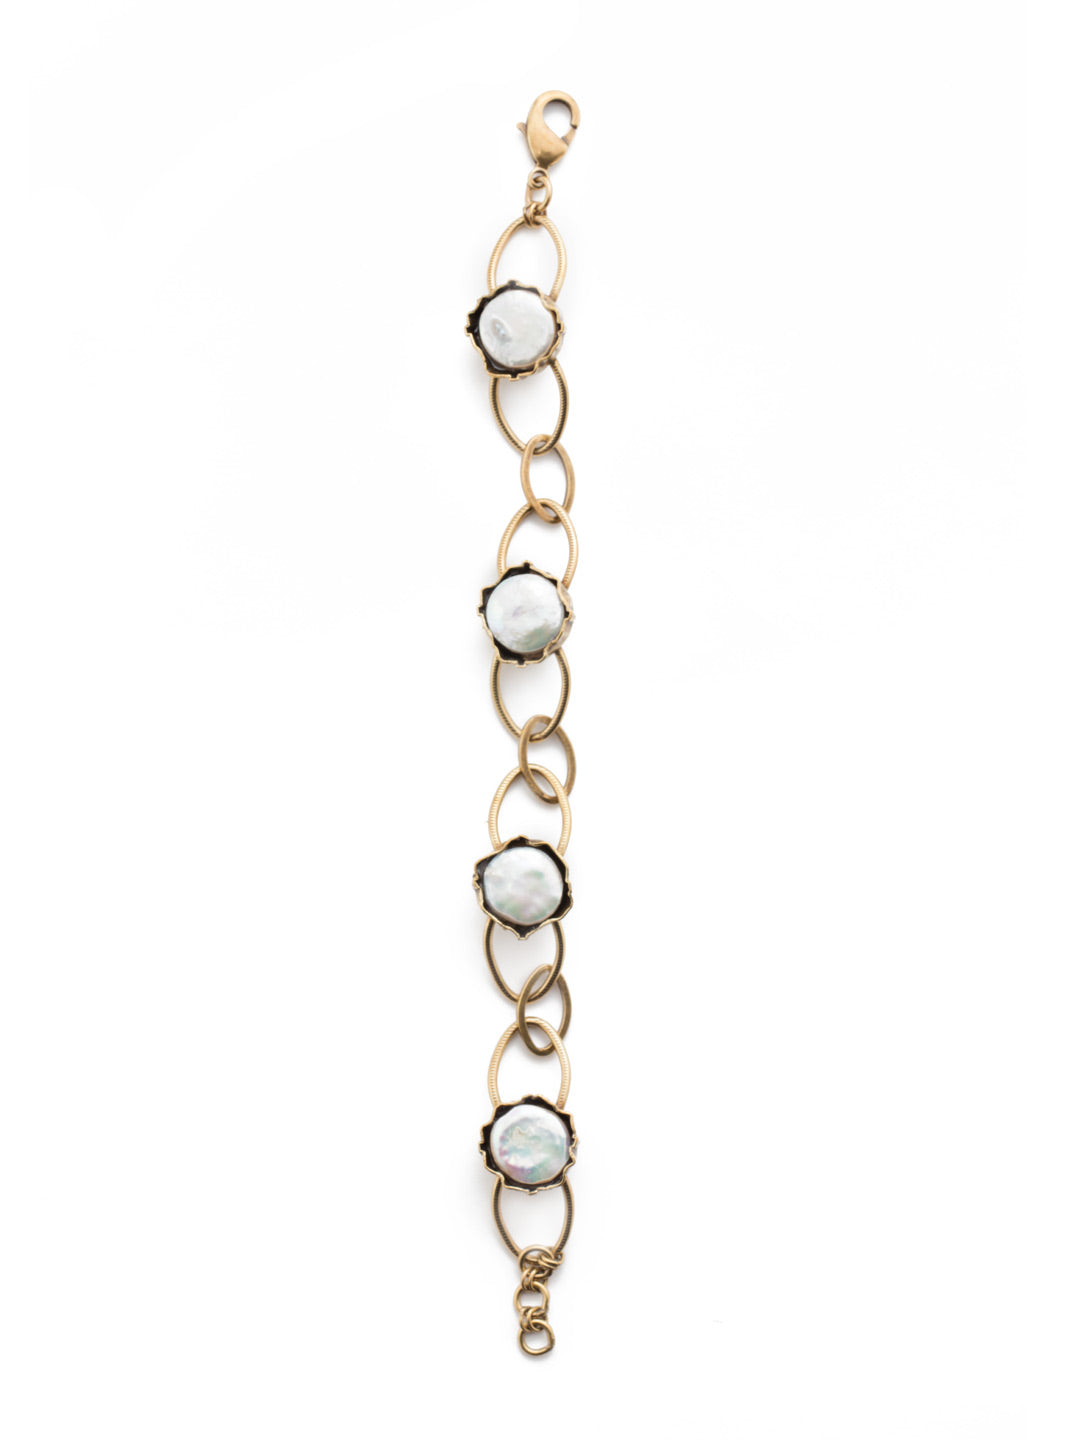 Nairobi Tennis Bracelet - 4BEU1AGMDP - <p>Fasten on our Nairobi Tennis Bracelet for loops of metal dotted with classic freshwater pearls framed in edgy metalwork. It's extra-special. From Sorrelli's Modern Pearl collection in our Antique Gold-tone finish.</p>